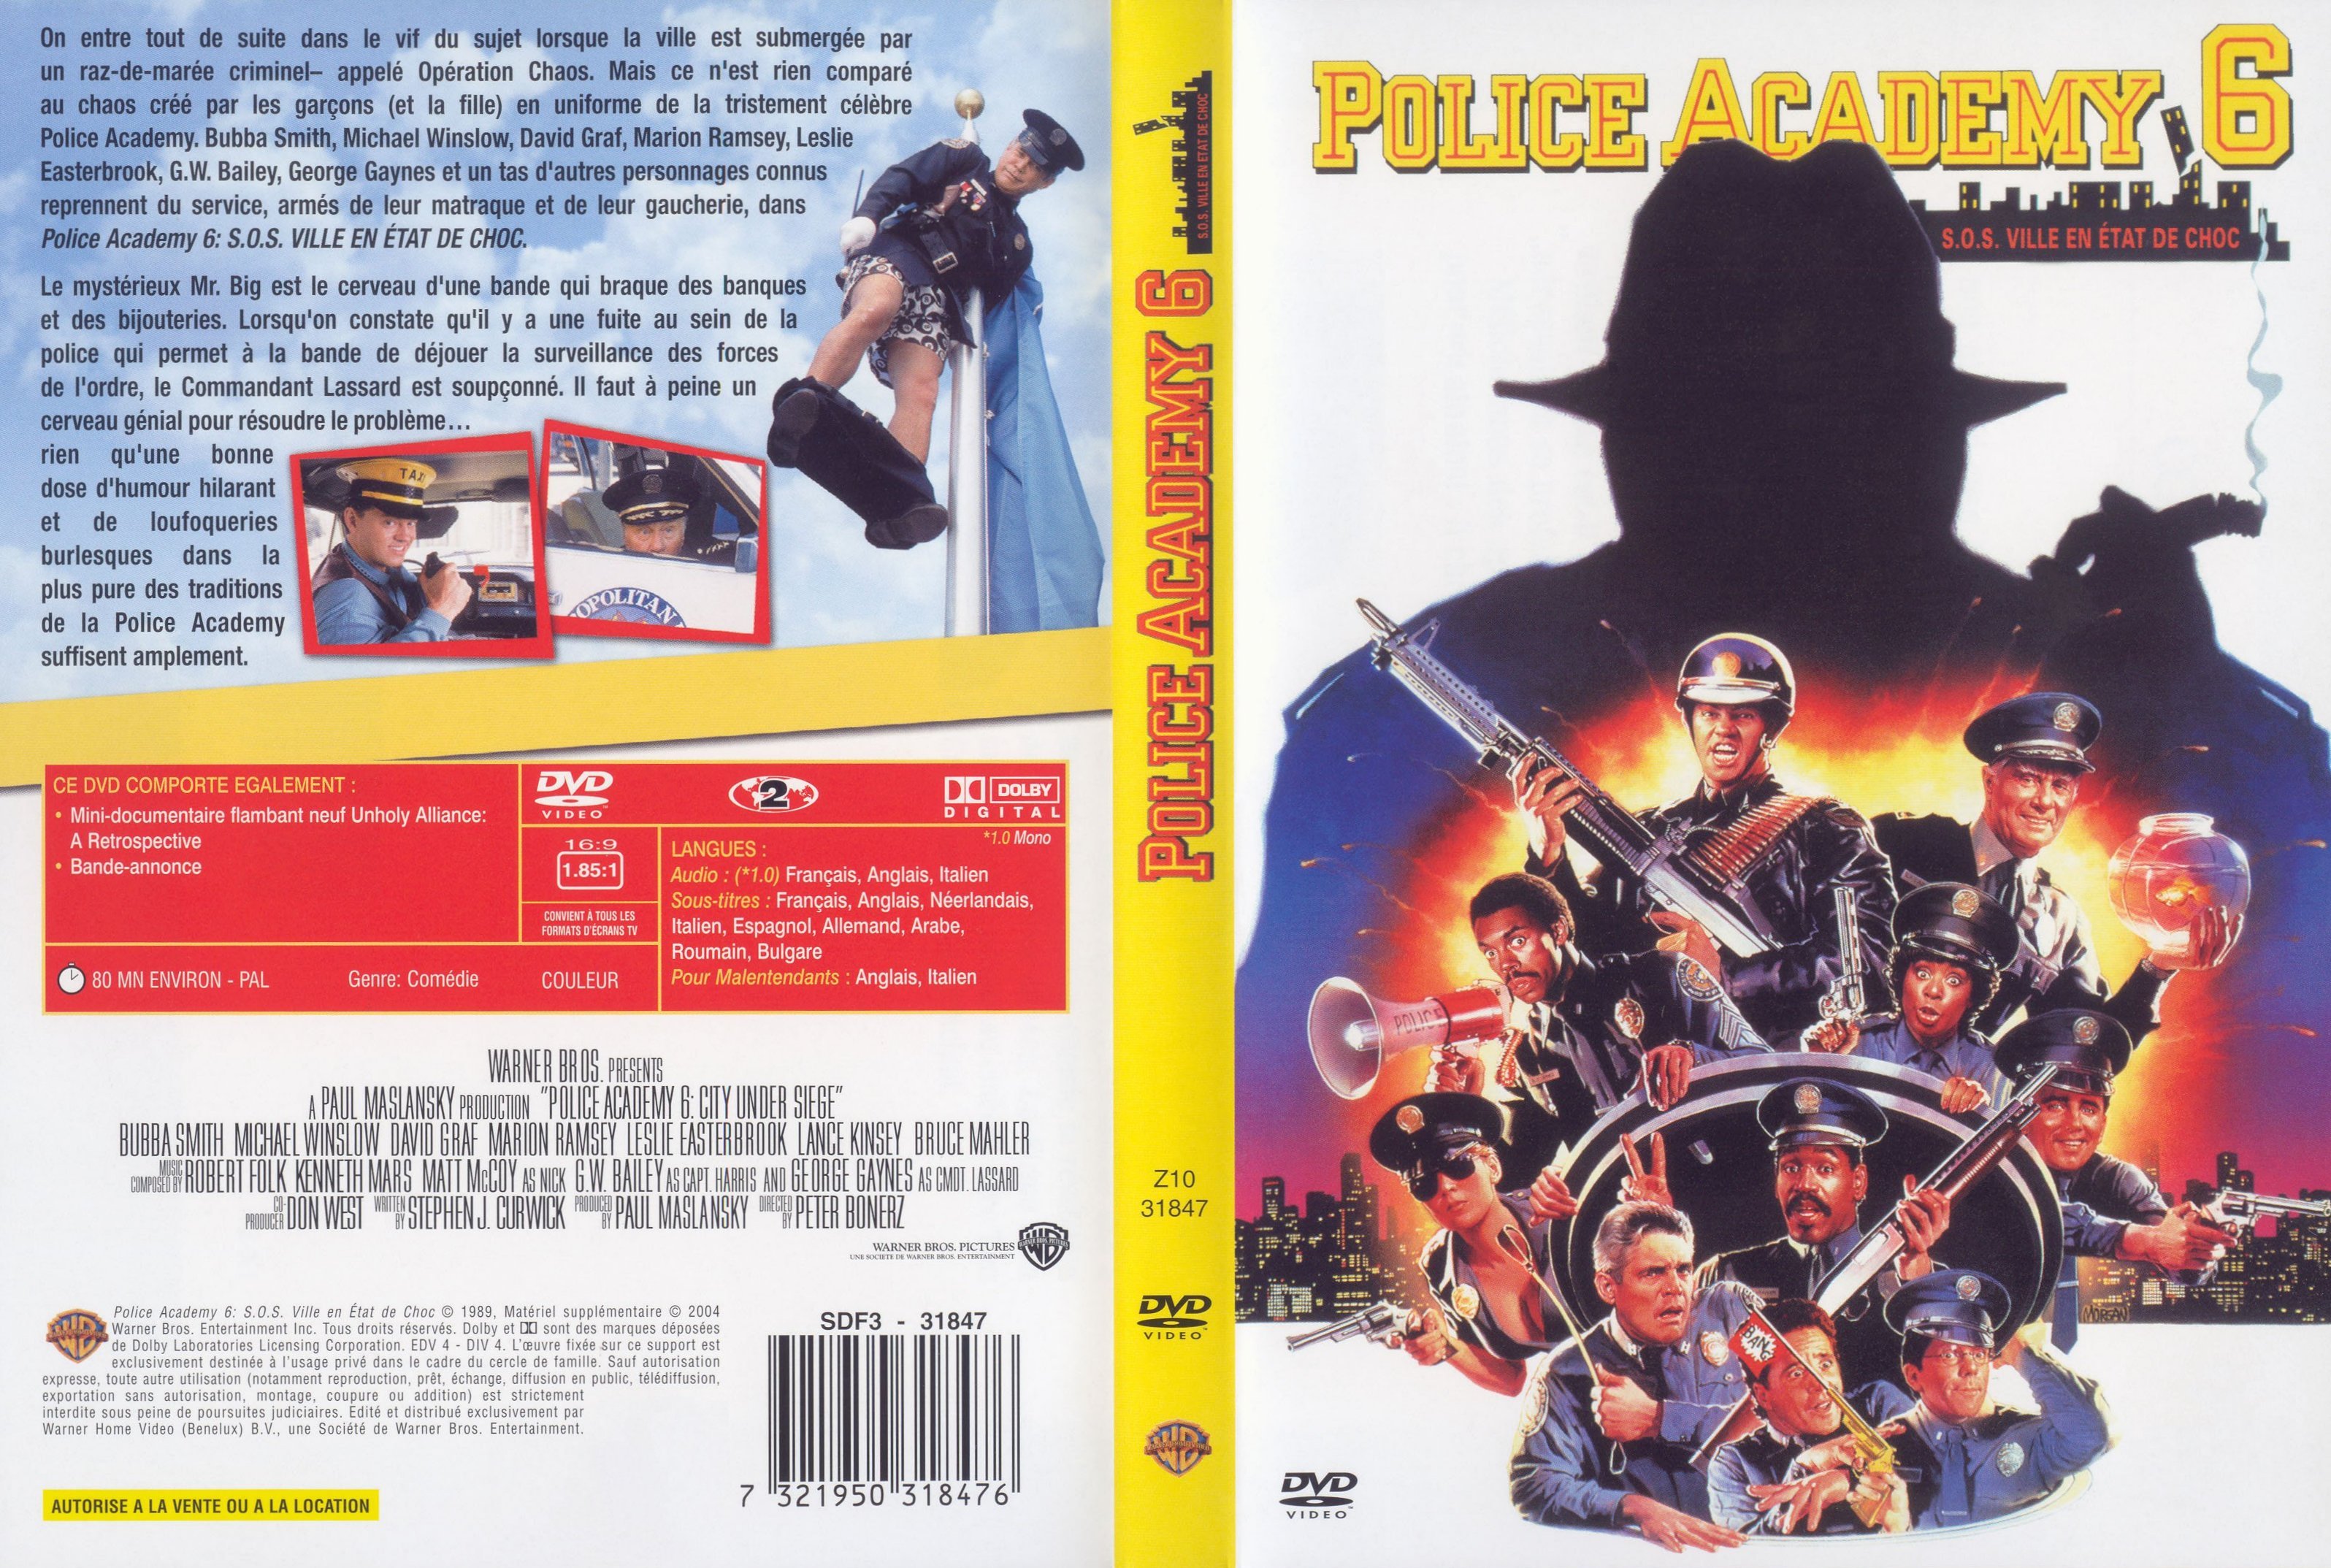 Jaquette DVD Police academy 6